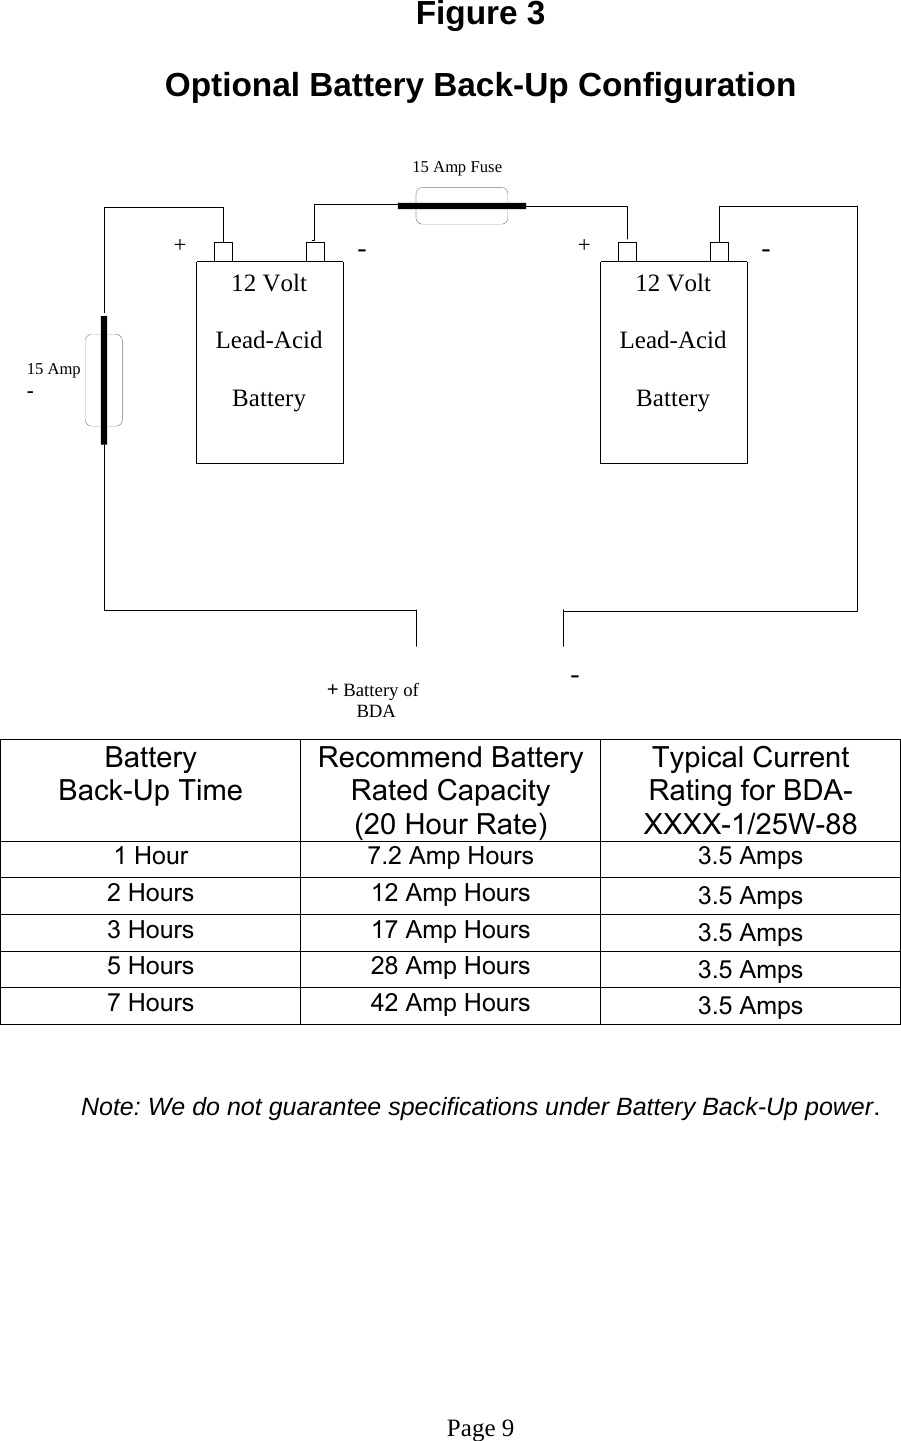  Figure 3  Optional Battery Back-Up Configuration  Battery  Back-Up Time Recommend Battery Rated Capacity (20 Hour Rate) Typical Current Rating for BDA-XXXX-1/25W-88 1 Hour  7.2 Amp Hours  3.5 Amps 2 Hours  12 Amp Hours 3.5 Amps 3 Hours  17 Amp Hours 3.5 Amps 5 Hours  28 Amp Hours 3.5 Amps 7 Hours  42 Amp Hours 3.5 Amps   Note: We do not guarantee specifications under Battery Back-Up power.           Page 9 15 Amp Fuse 15 Amp - 12 Volt  Lead-Acid  Battery  12 Volt  Lead-Acid Battery  ++- -+ Battery of BDA -